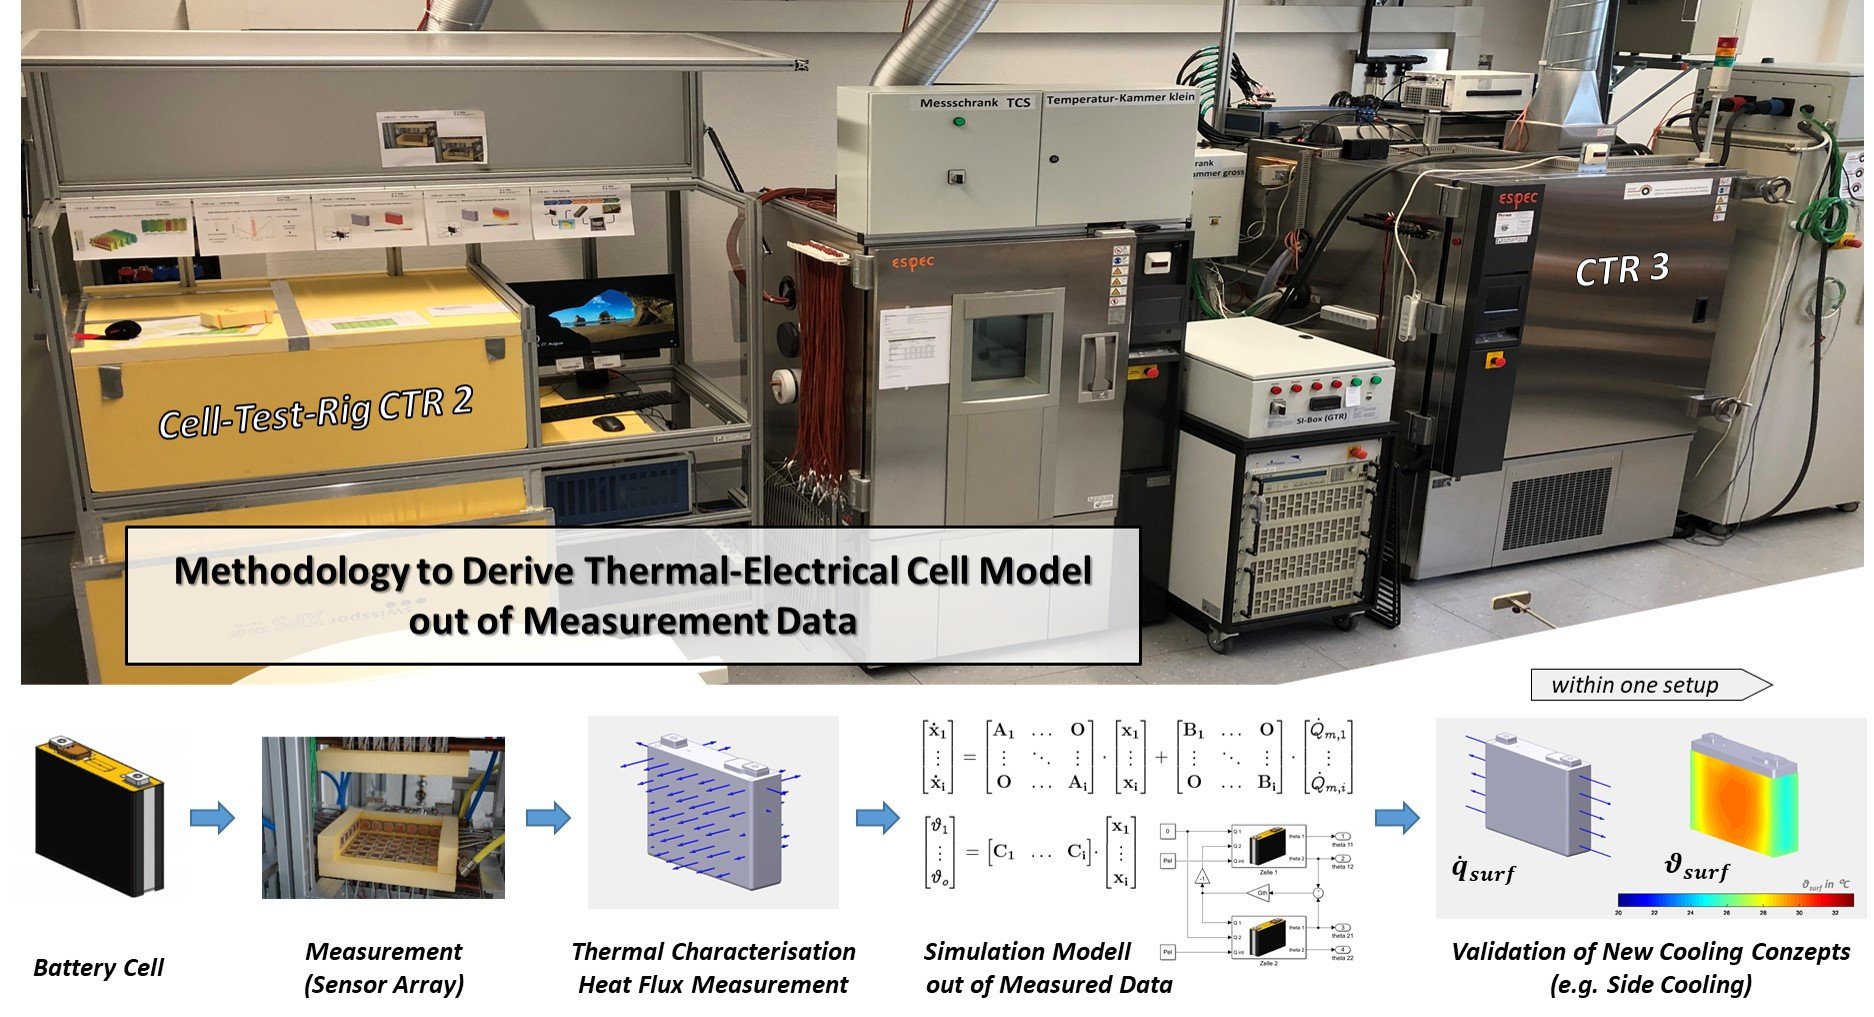 Methodology to Derive Thermal-Electrical Cell Model out of Measurement Data